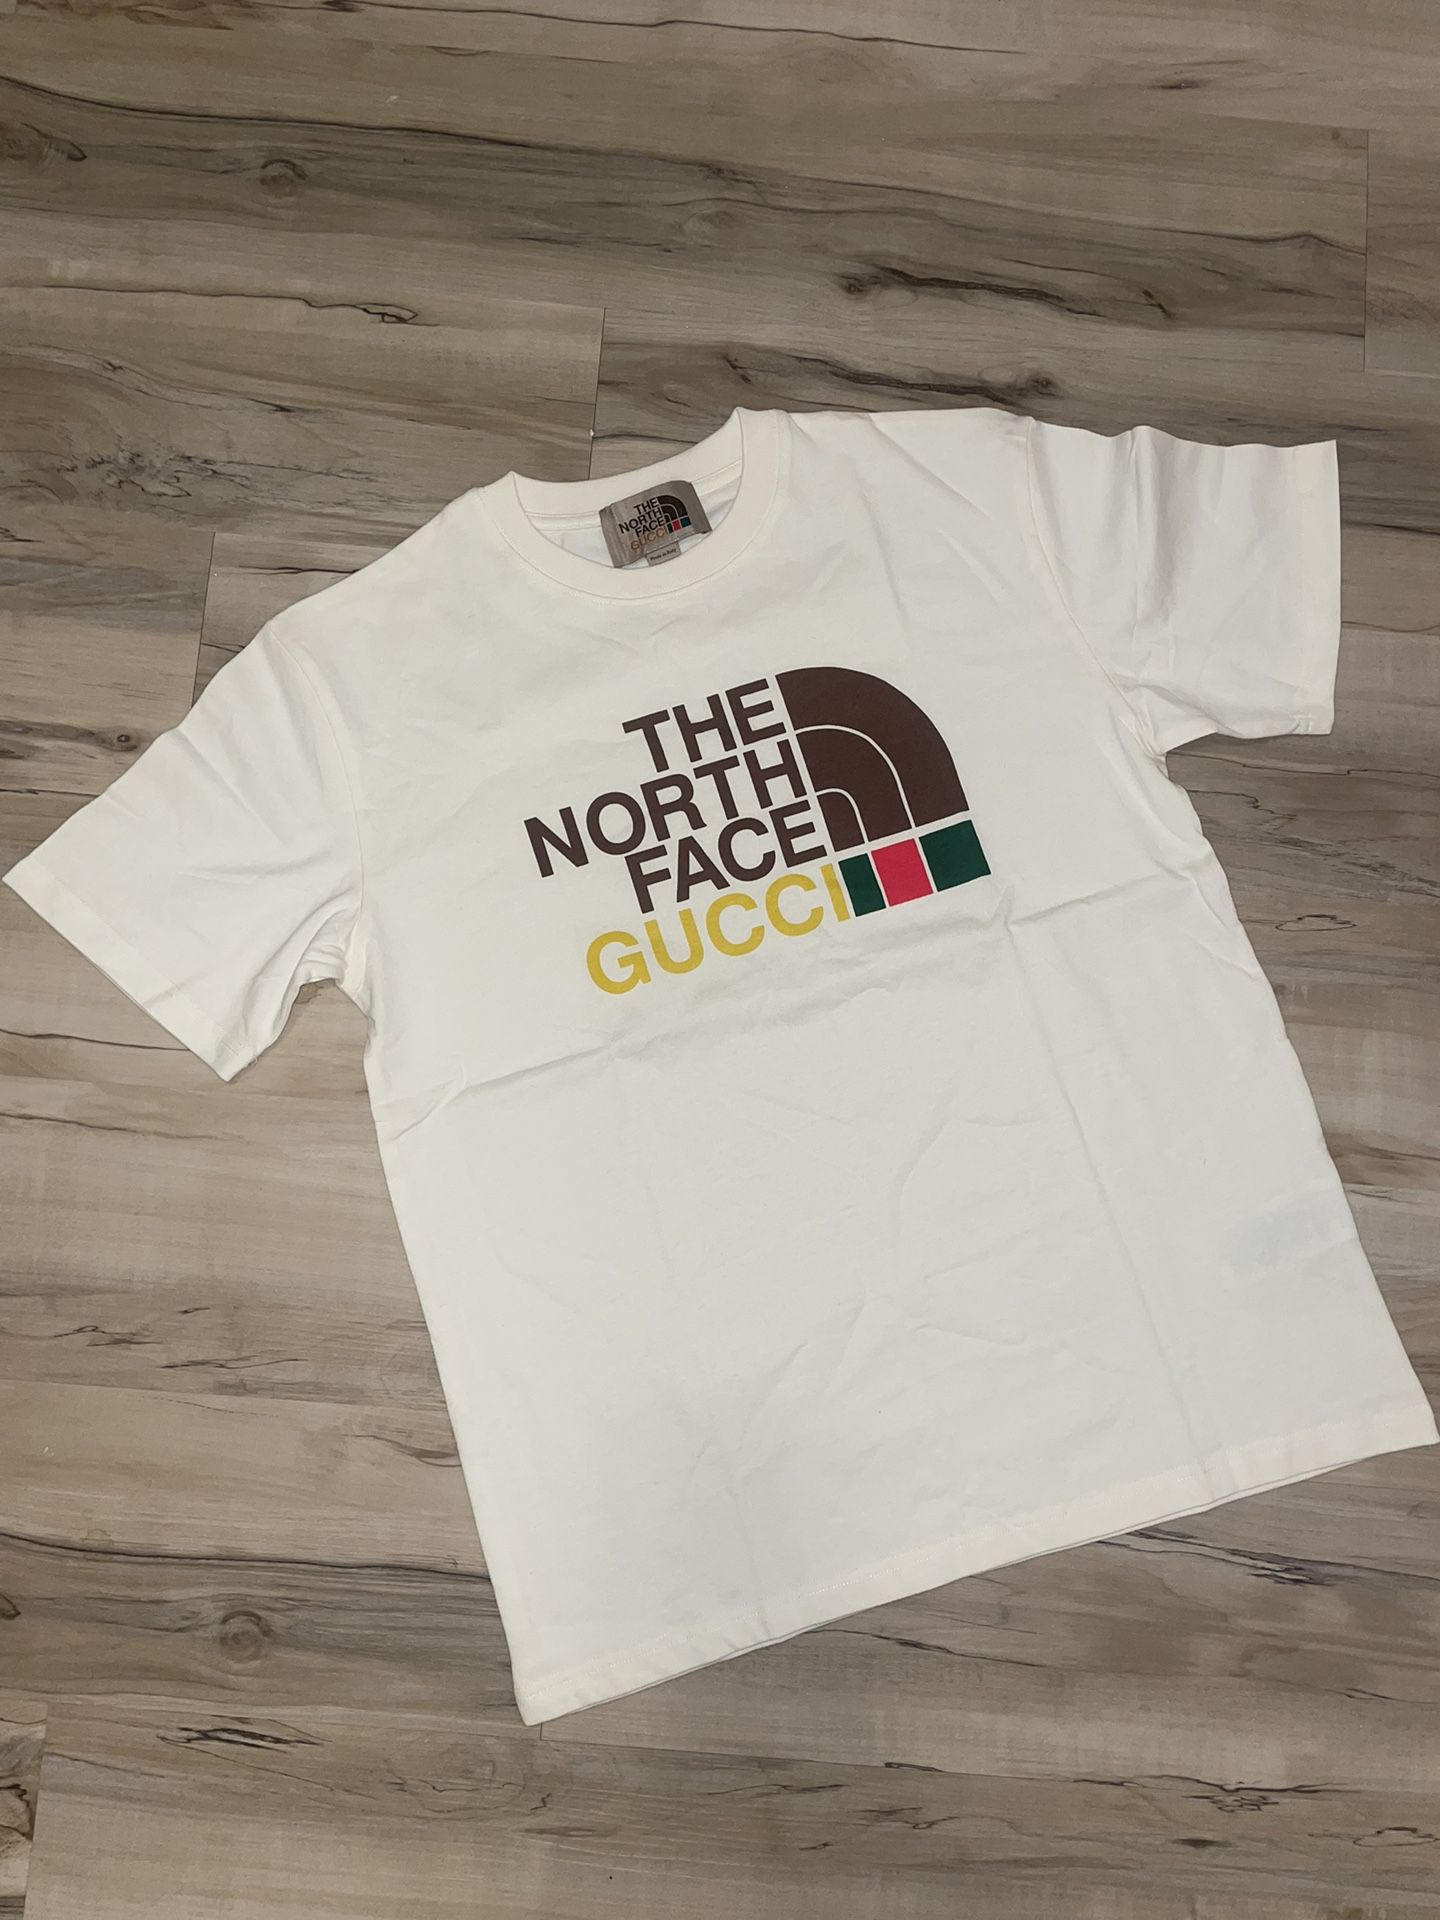 the north face x Gucci T-shirt